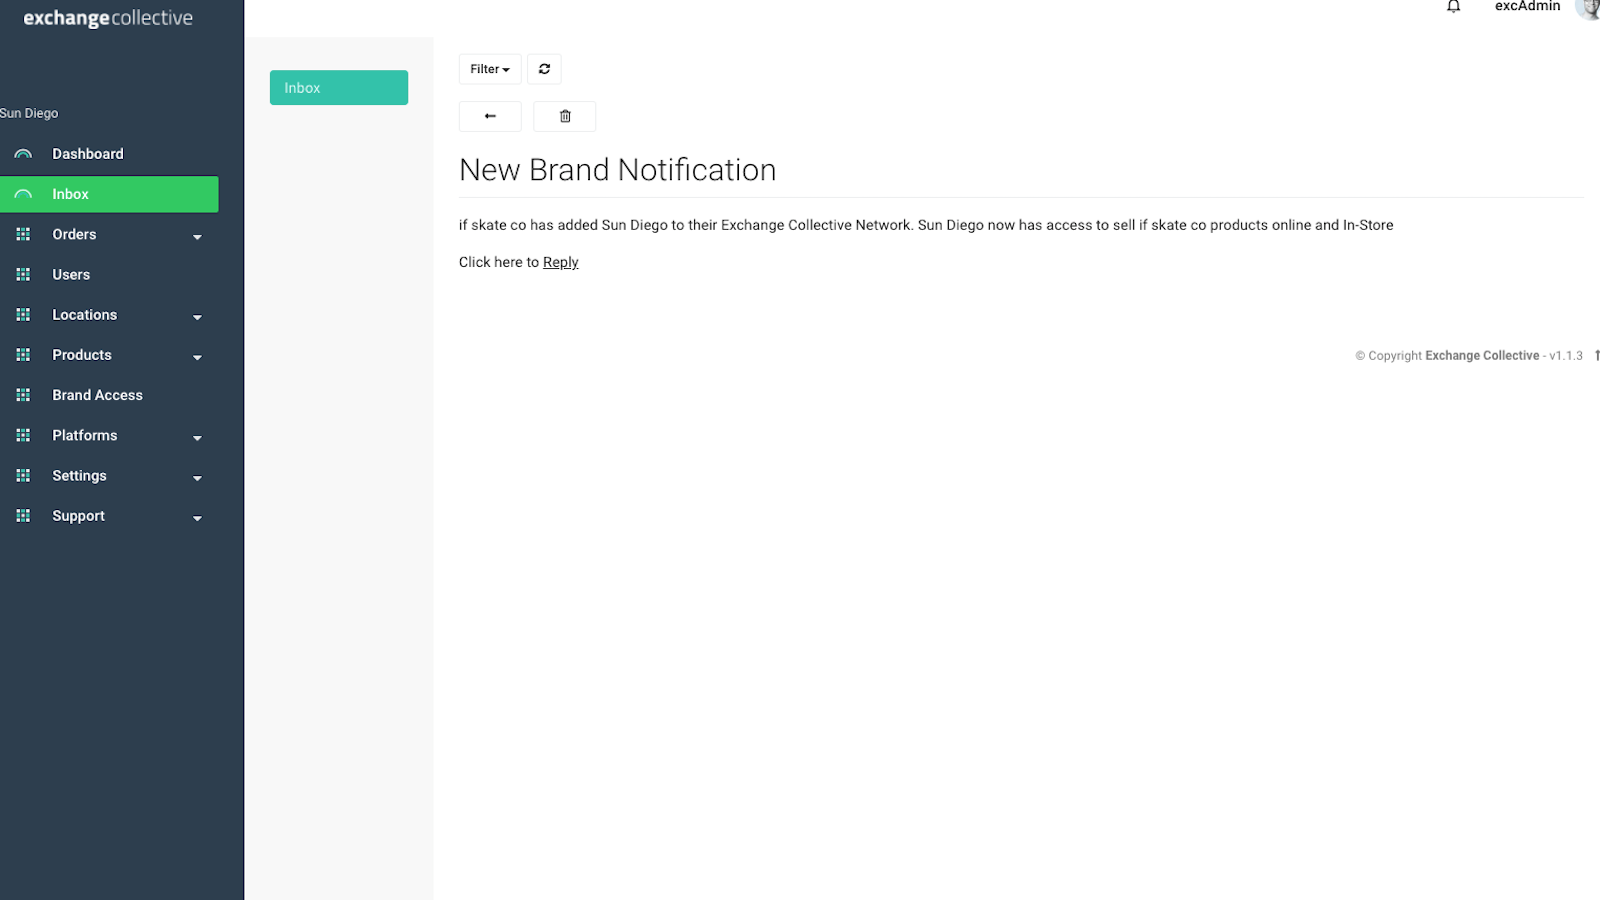 Get notifications when brands give you access to their products.